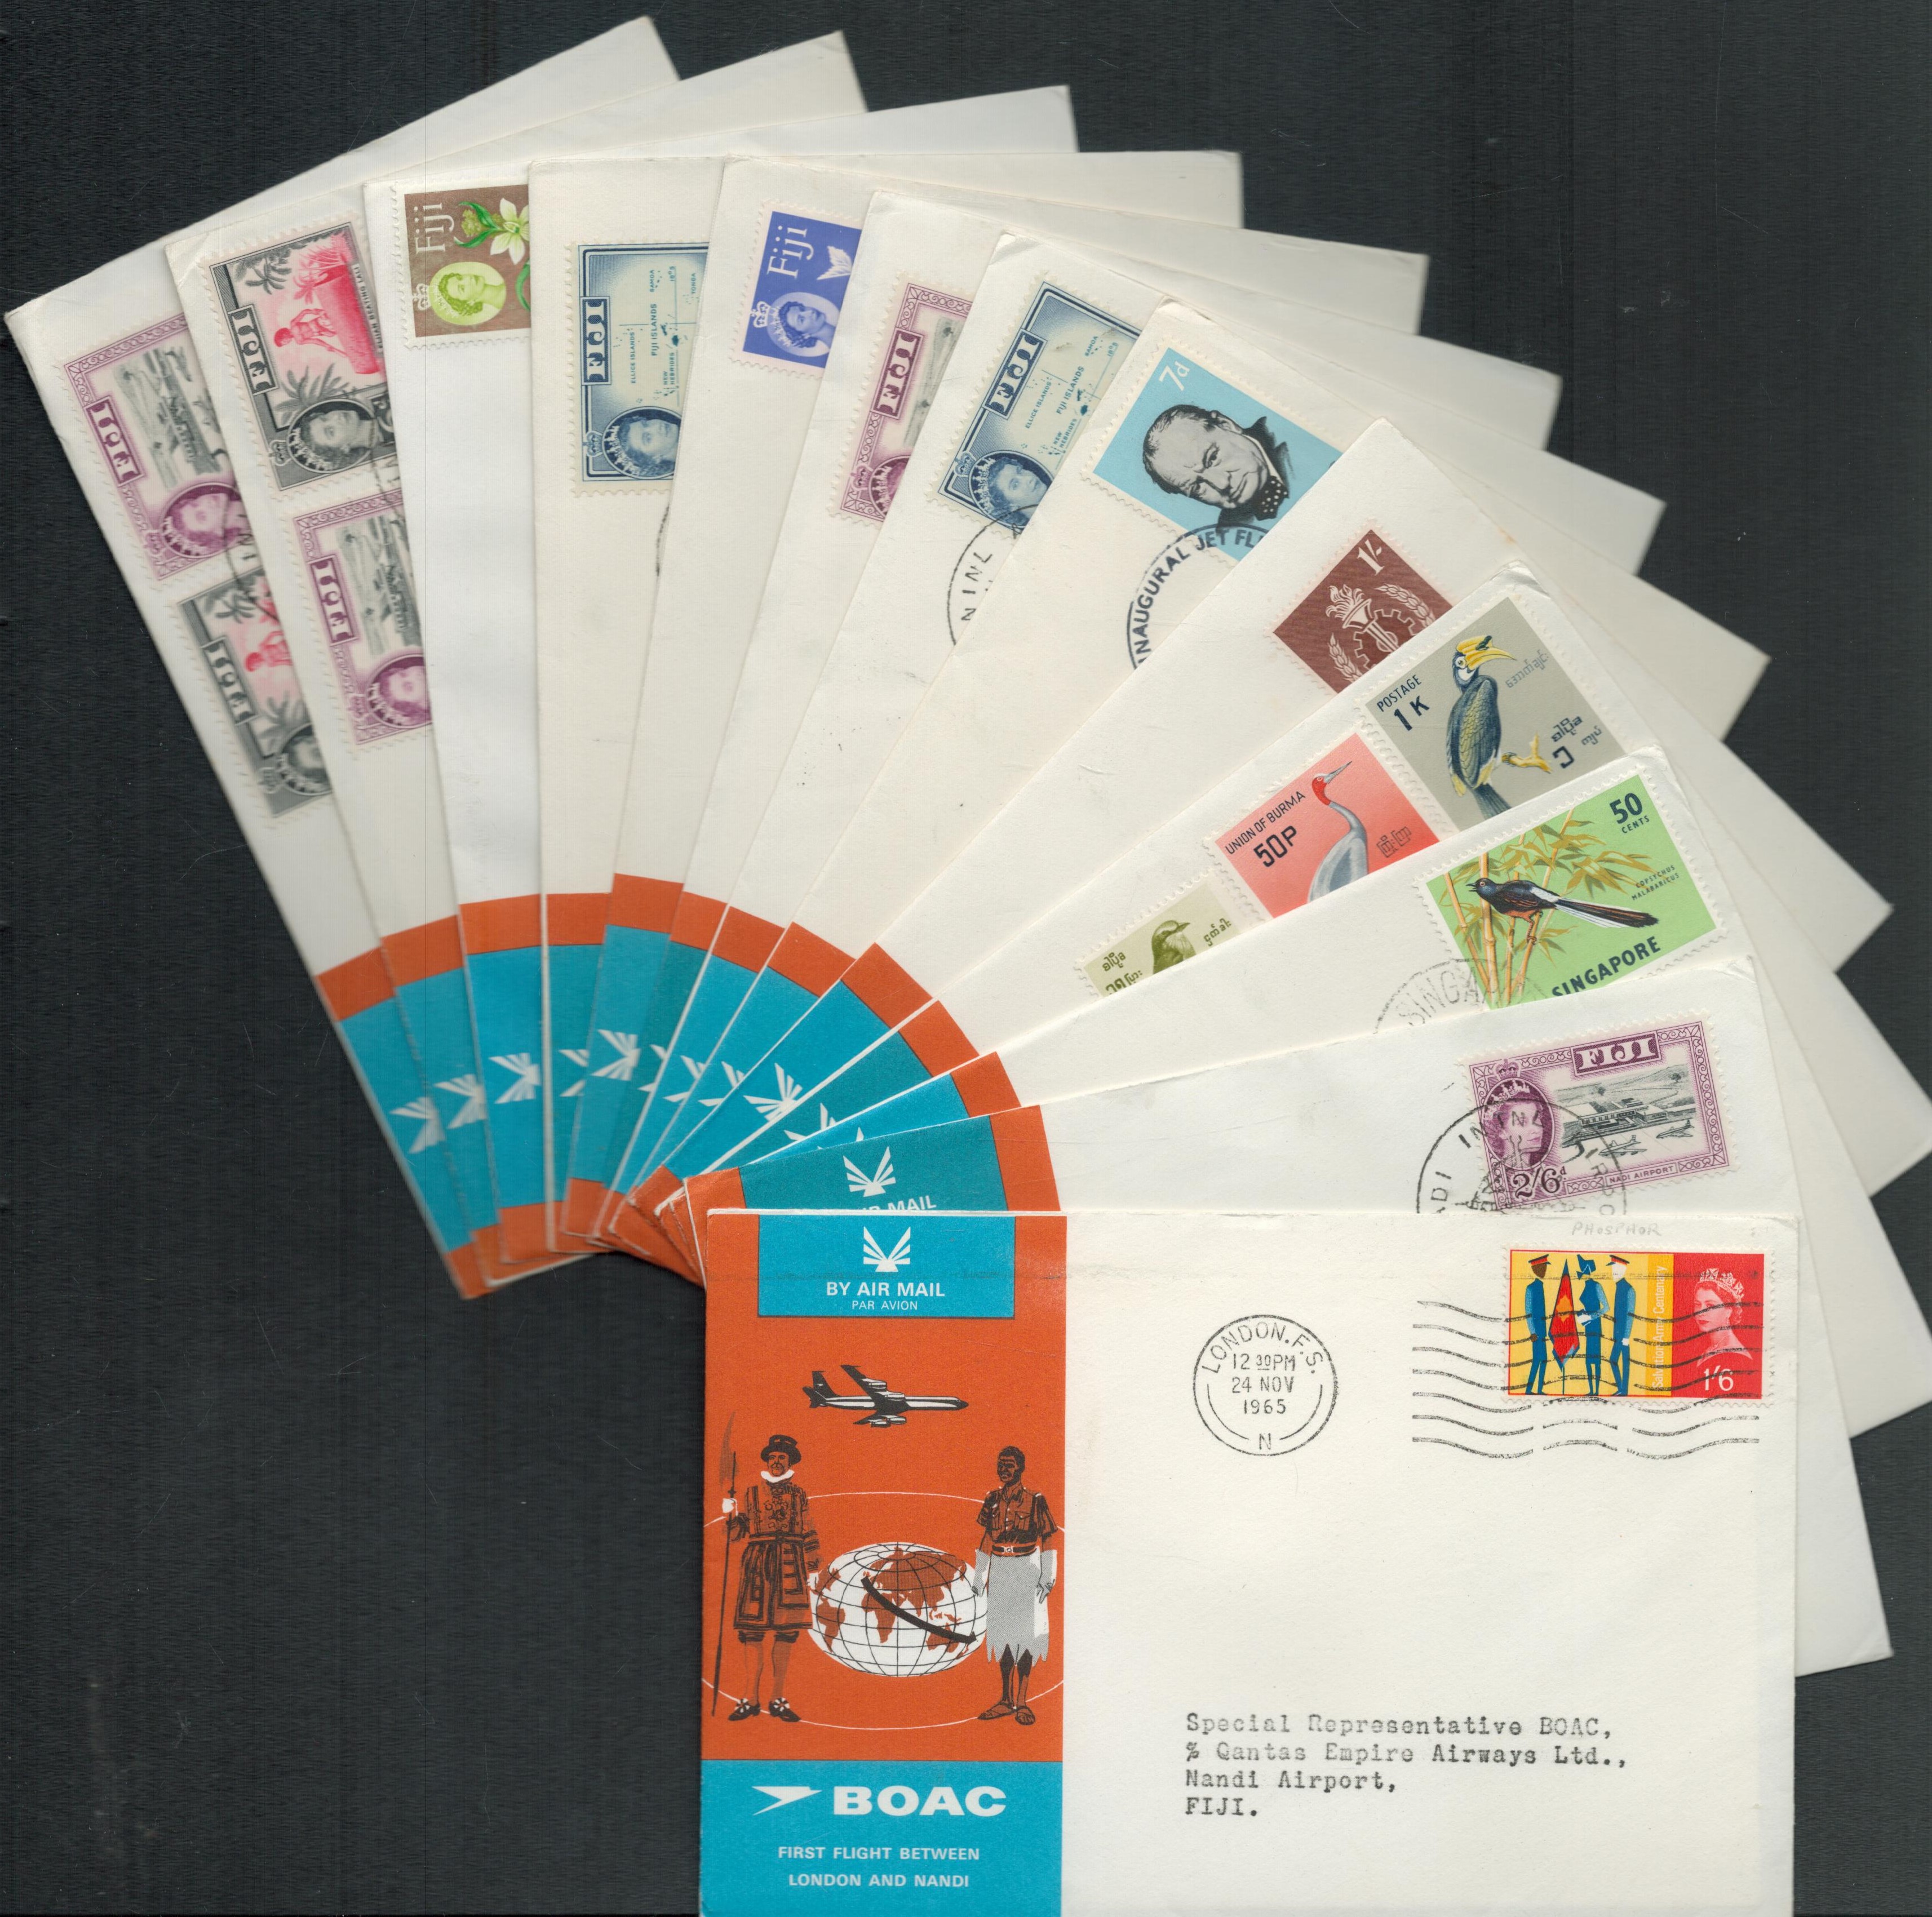 1965 BOAC collection of 13 first flight covers for the London and Nandi service. Stamps and